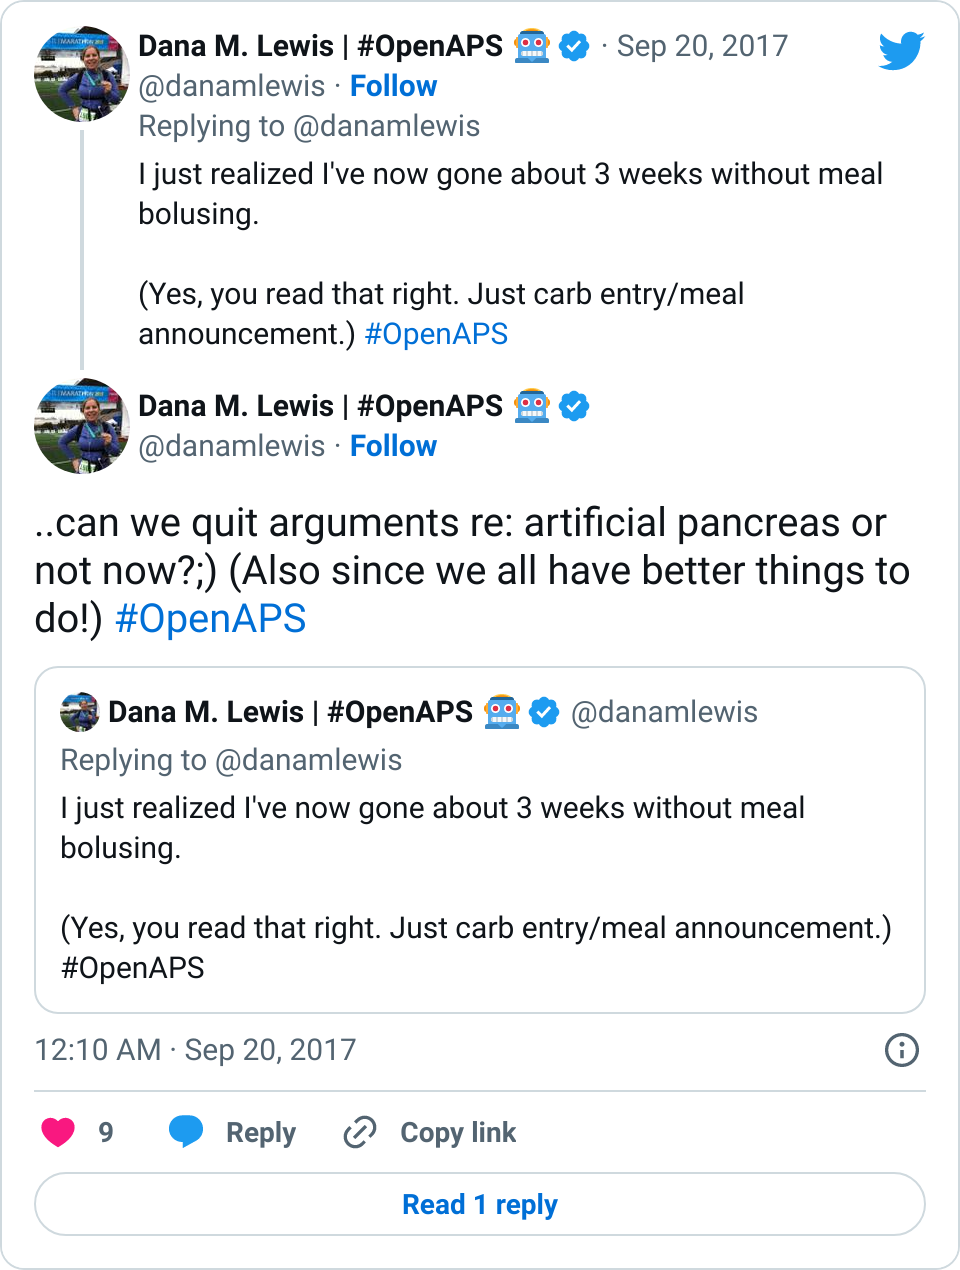 Suggesting no meal bolus means we can quit arguing about the name "artificial pancreas"